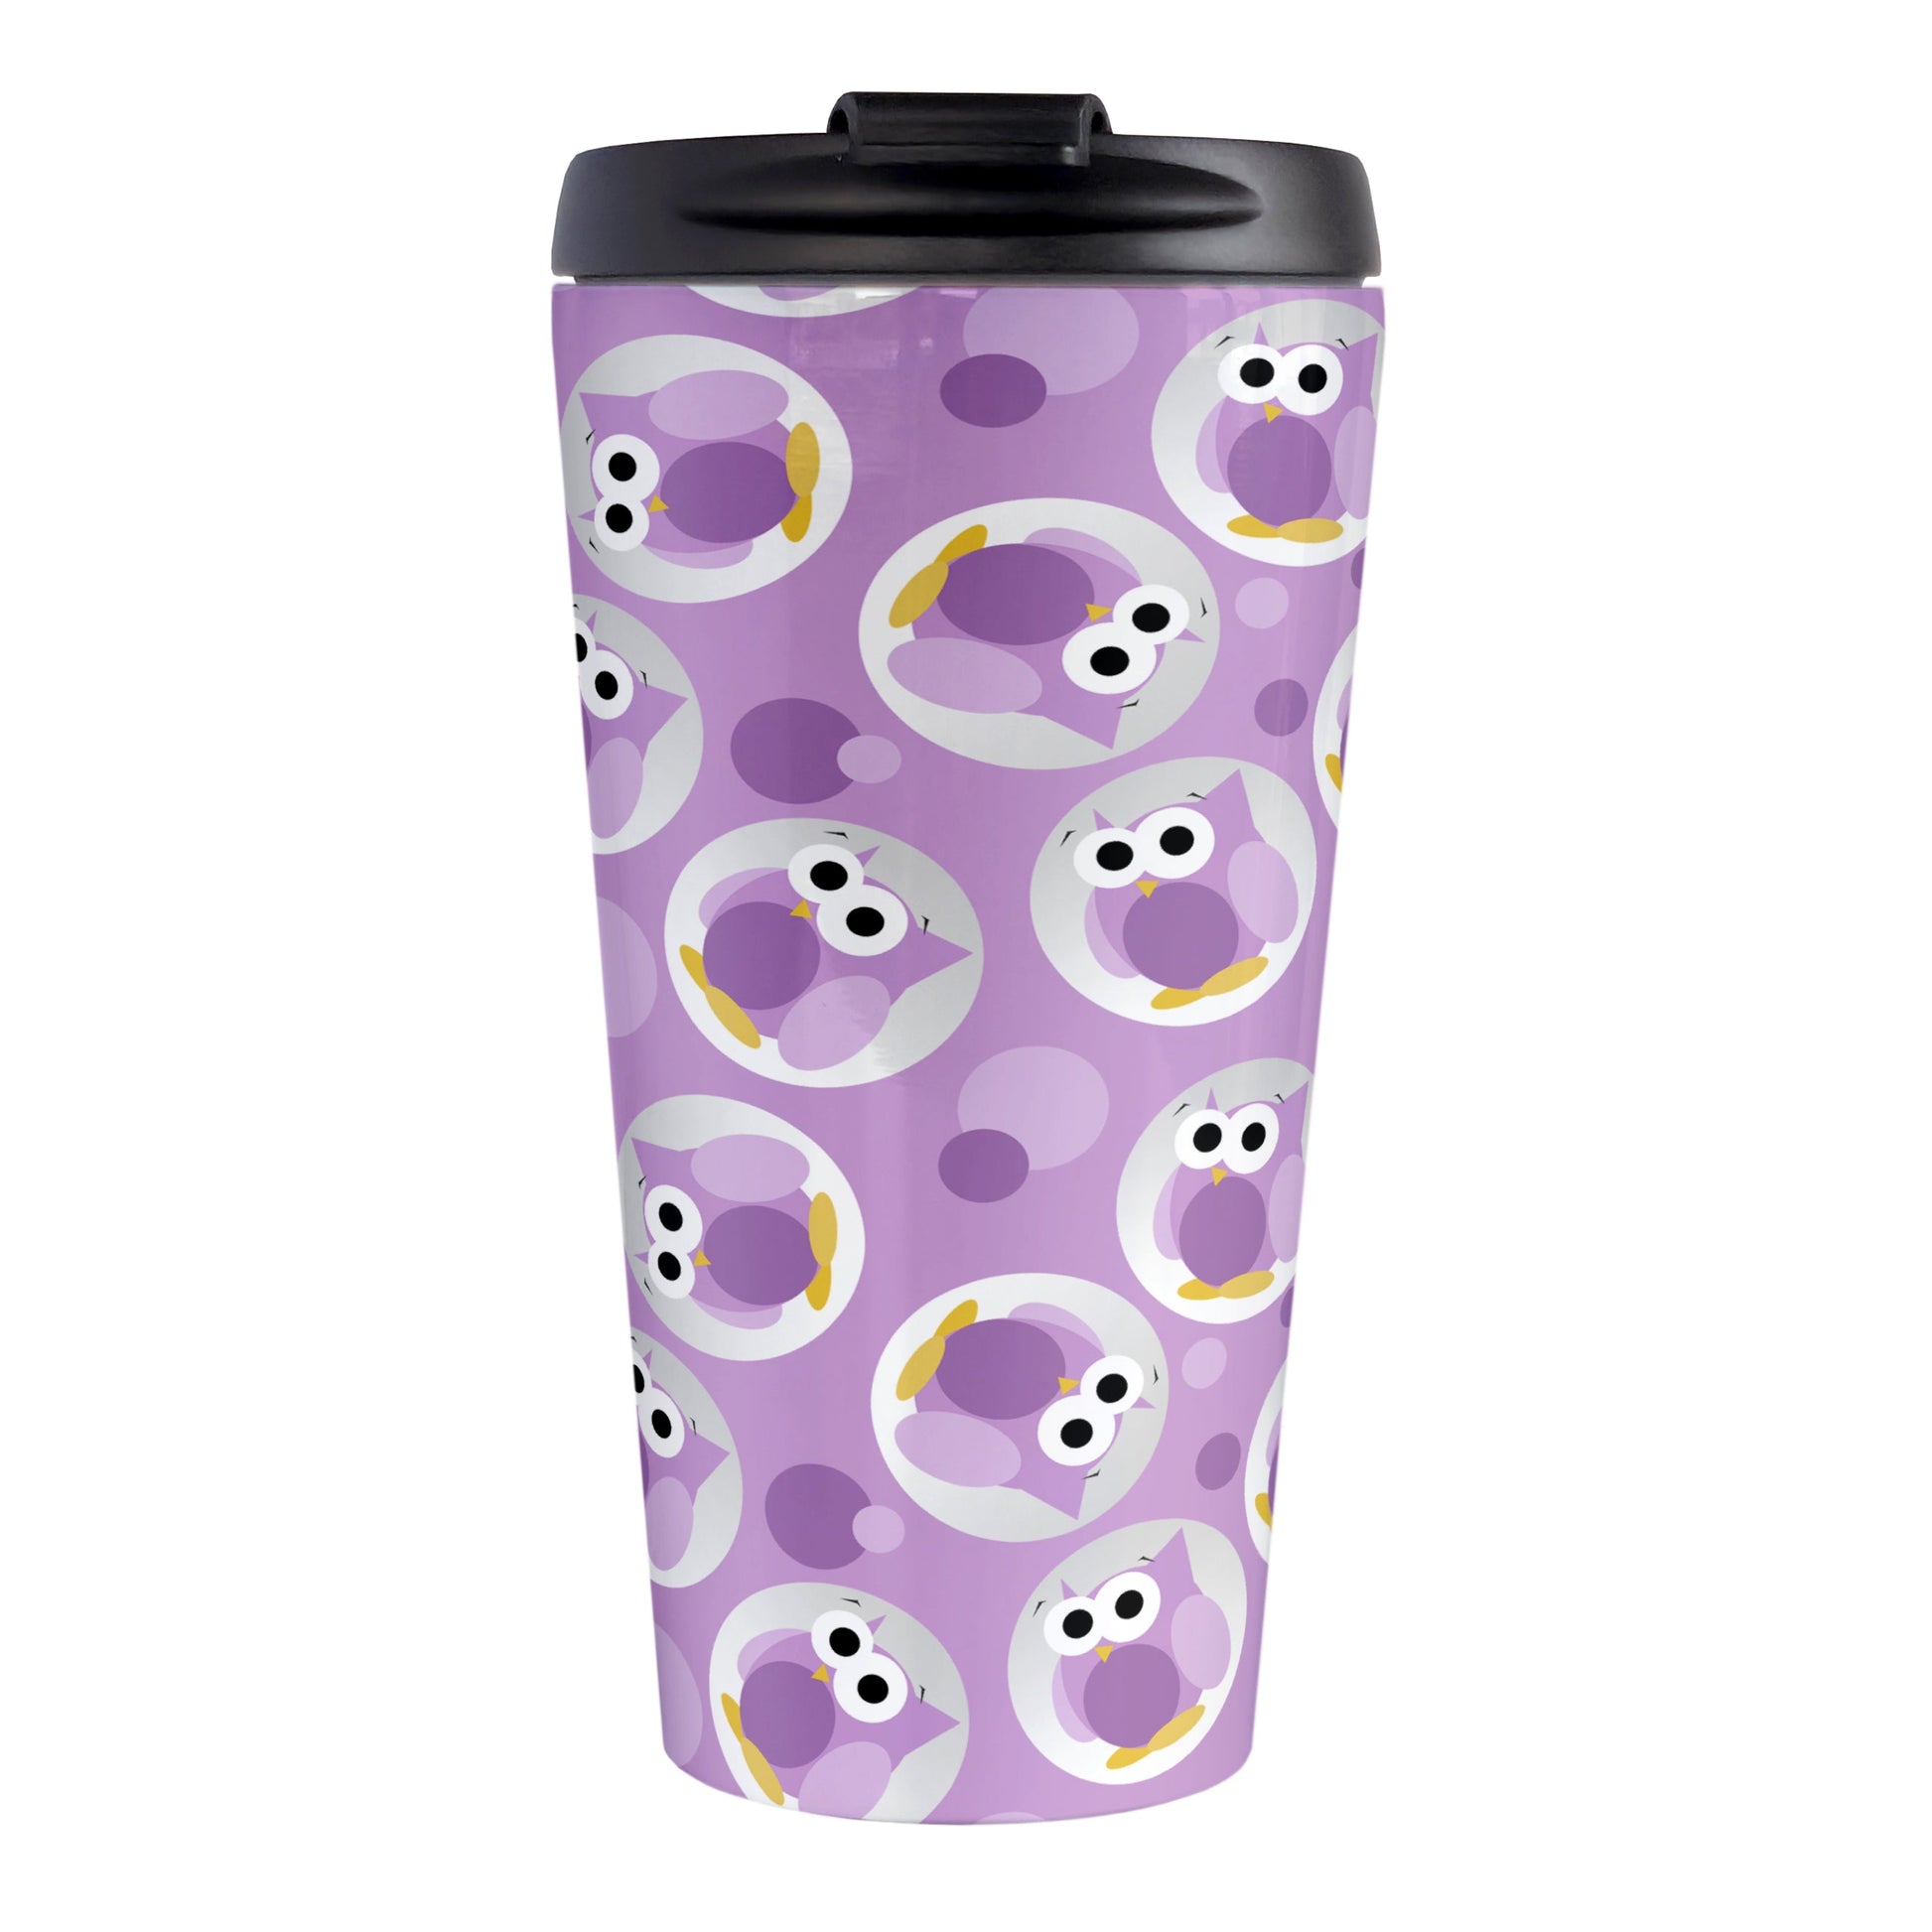 Funny Cute Purple Owl Pattern Travel Mug (15oz, stainless steel insulated) at Amy's Coffee Mugs